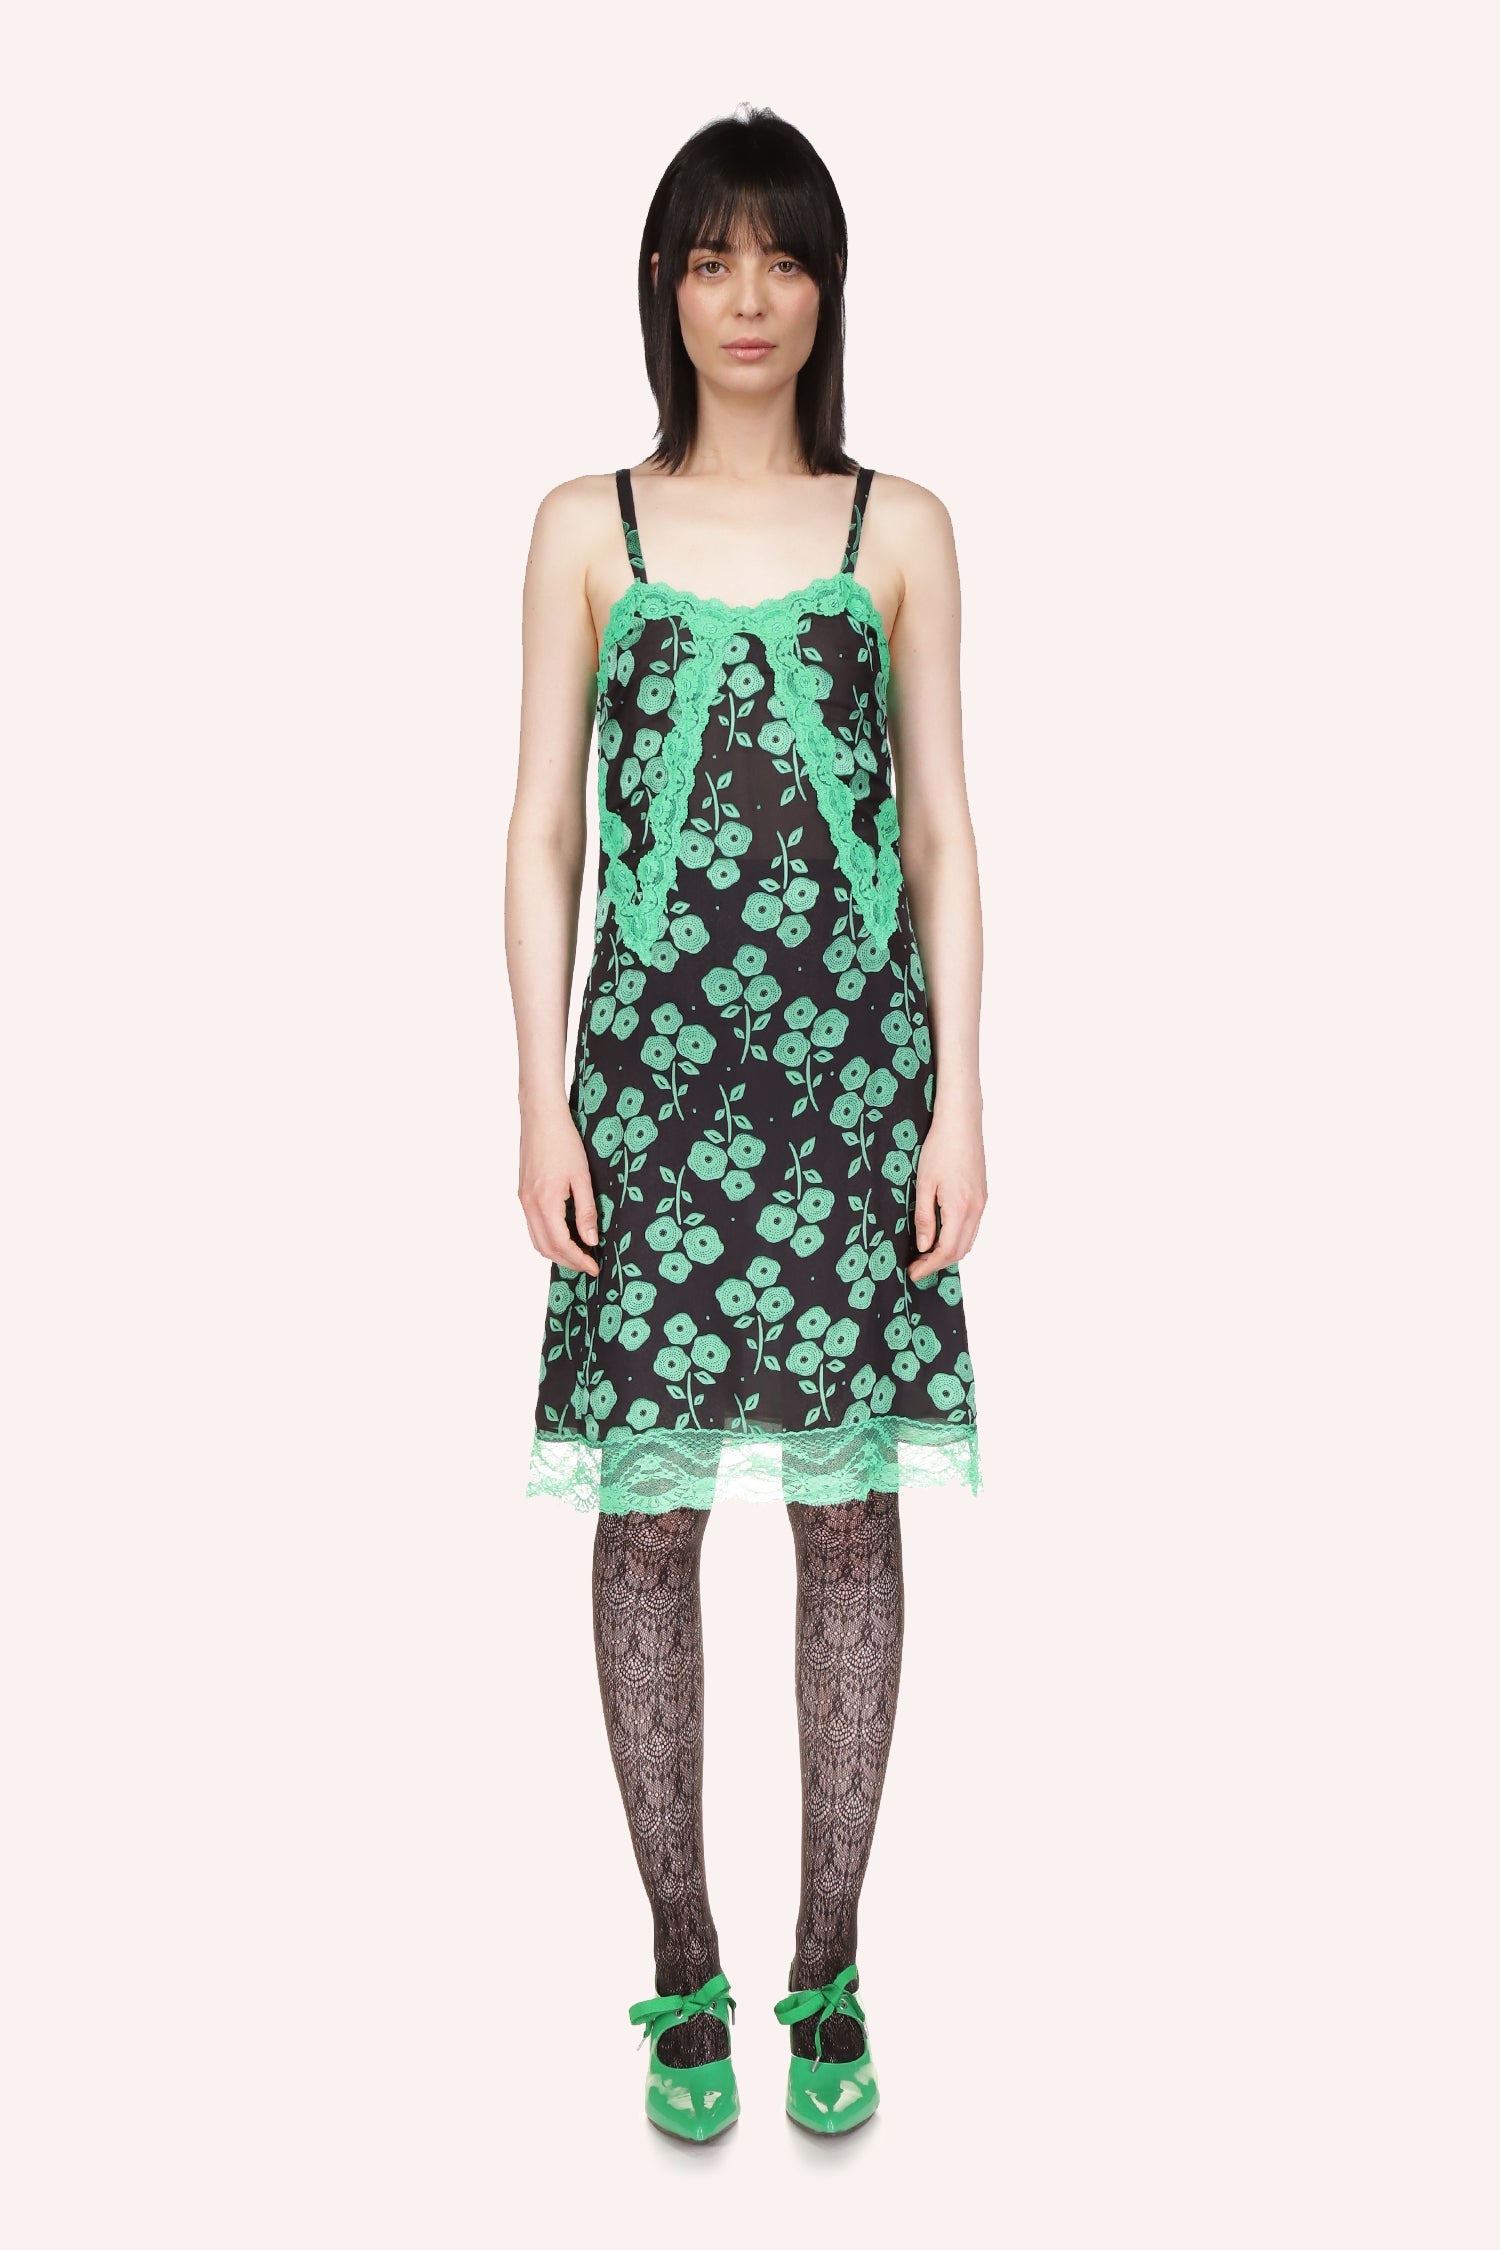 Poppies Dress clover petals pattern on black, sleeveless, 2-straps, knees-long, bottom green lace